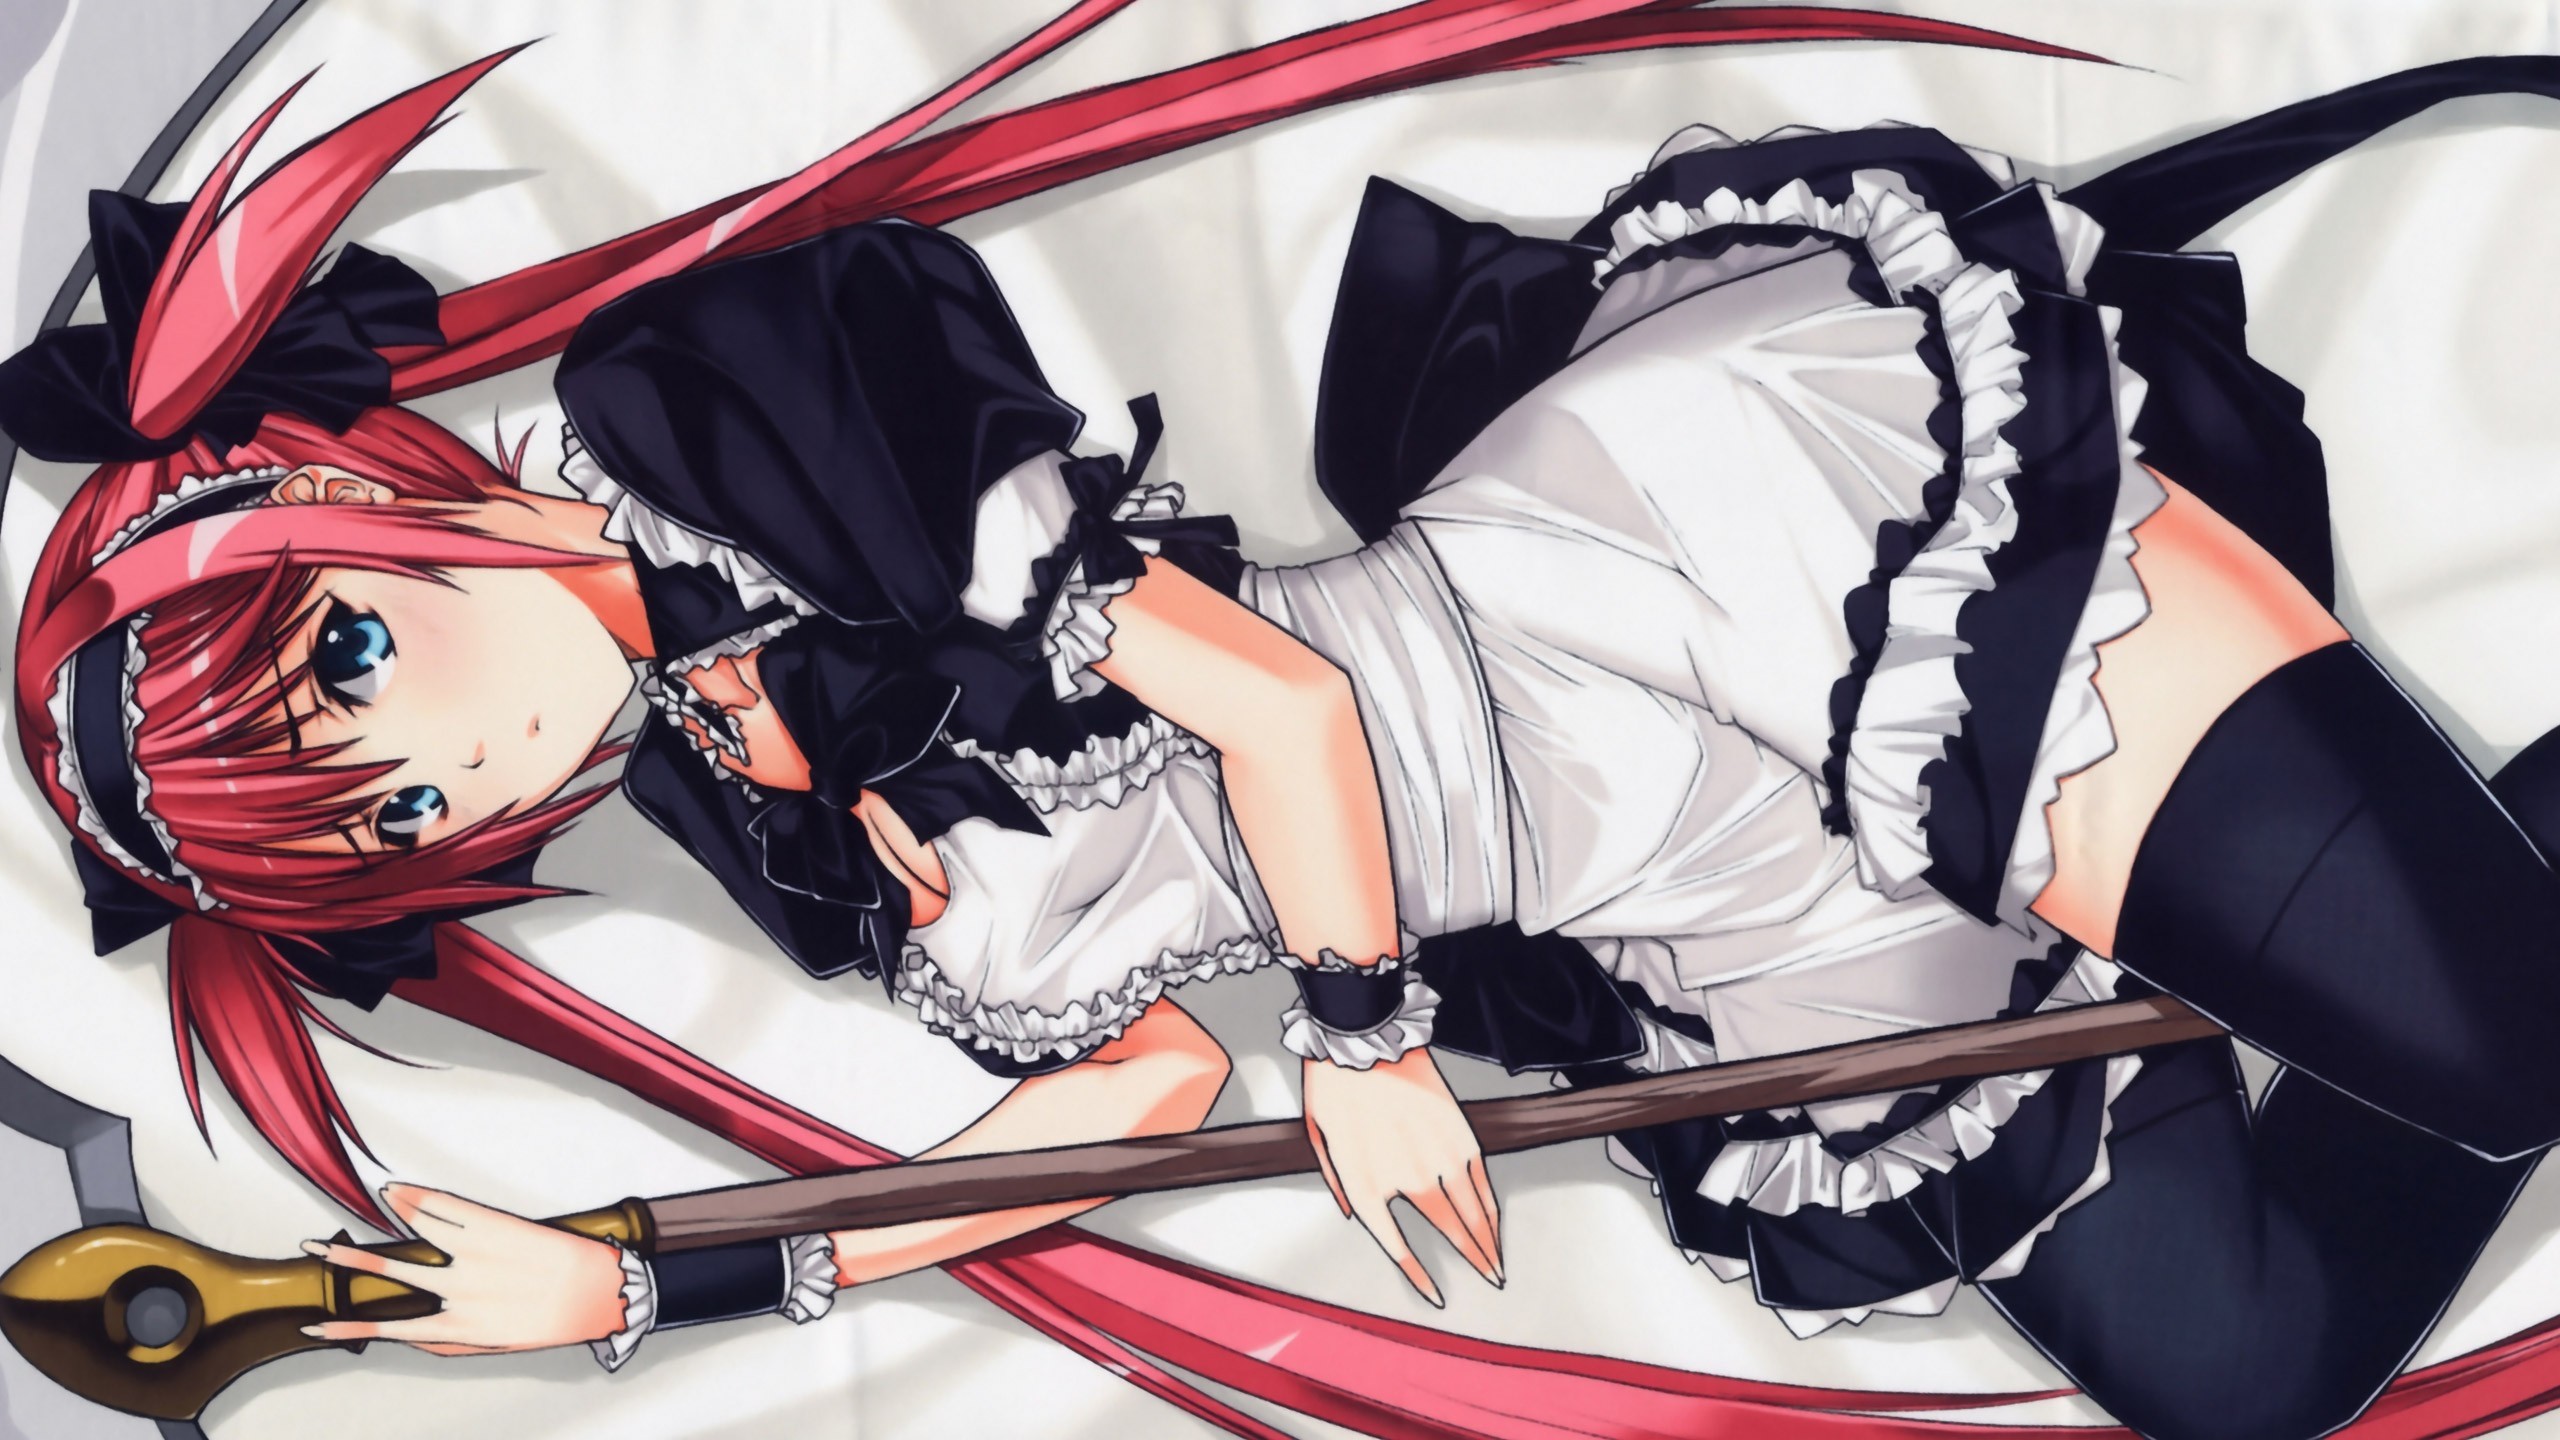 Maid Girl Anime Queen S Blade Wallpapers And Images Wallpapers